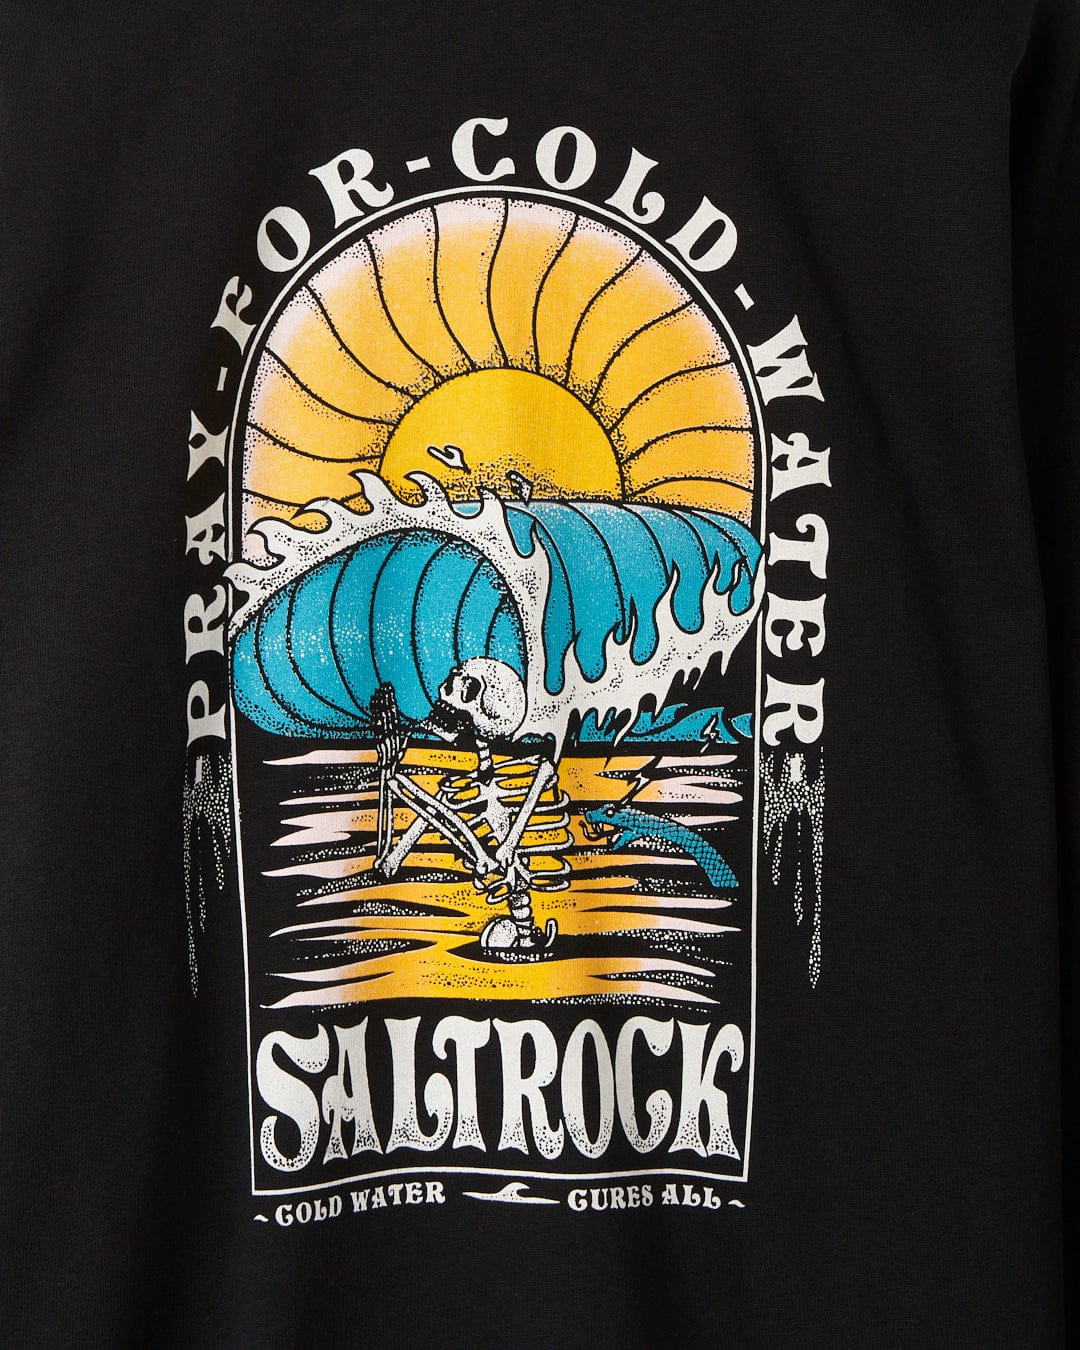 Graphic print on an Cold Water oversized black T-shirt featuring a skeleton surfing a large wave with the text "Pray for Cold Water" and "Saltrock" above and below the image.